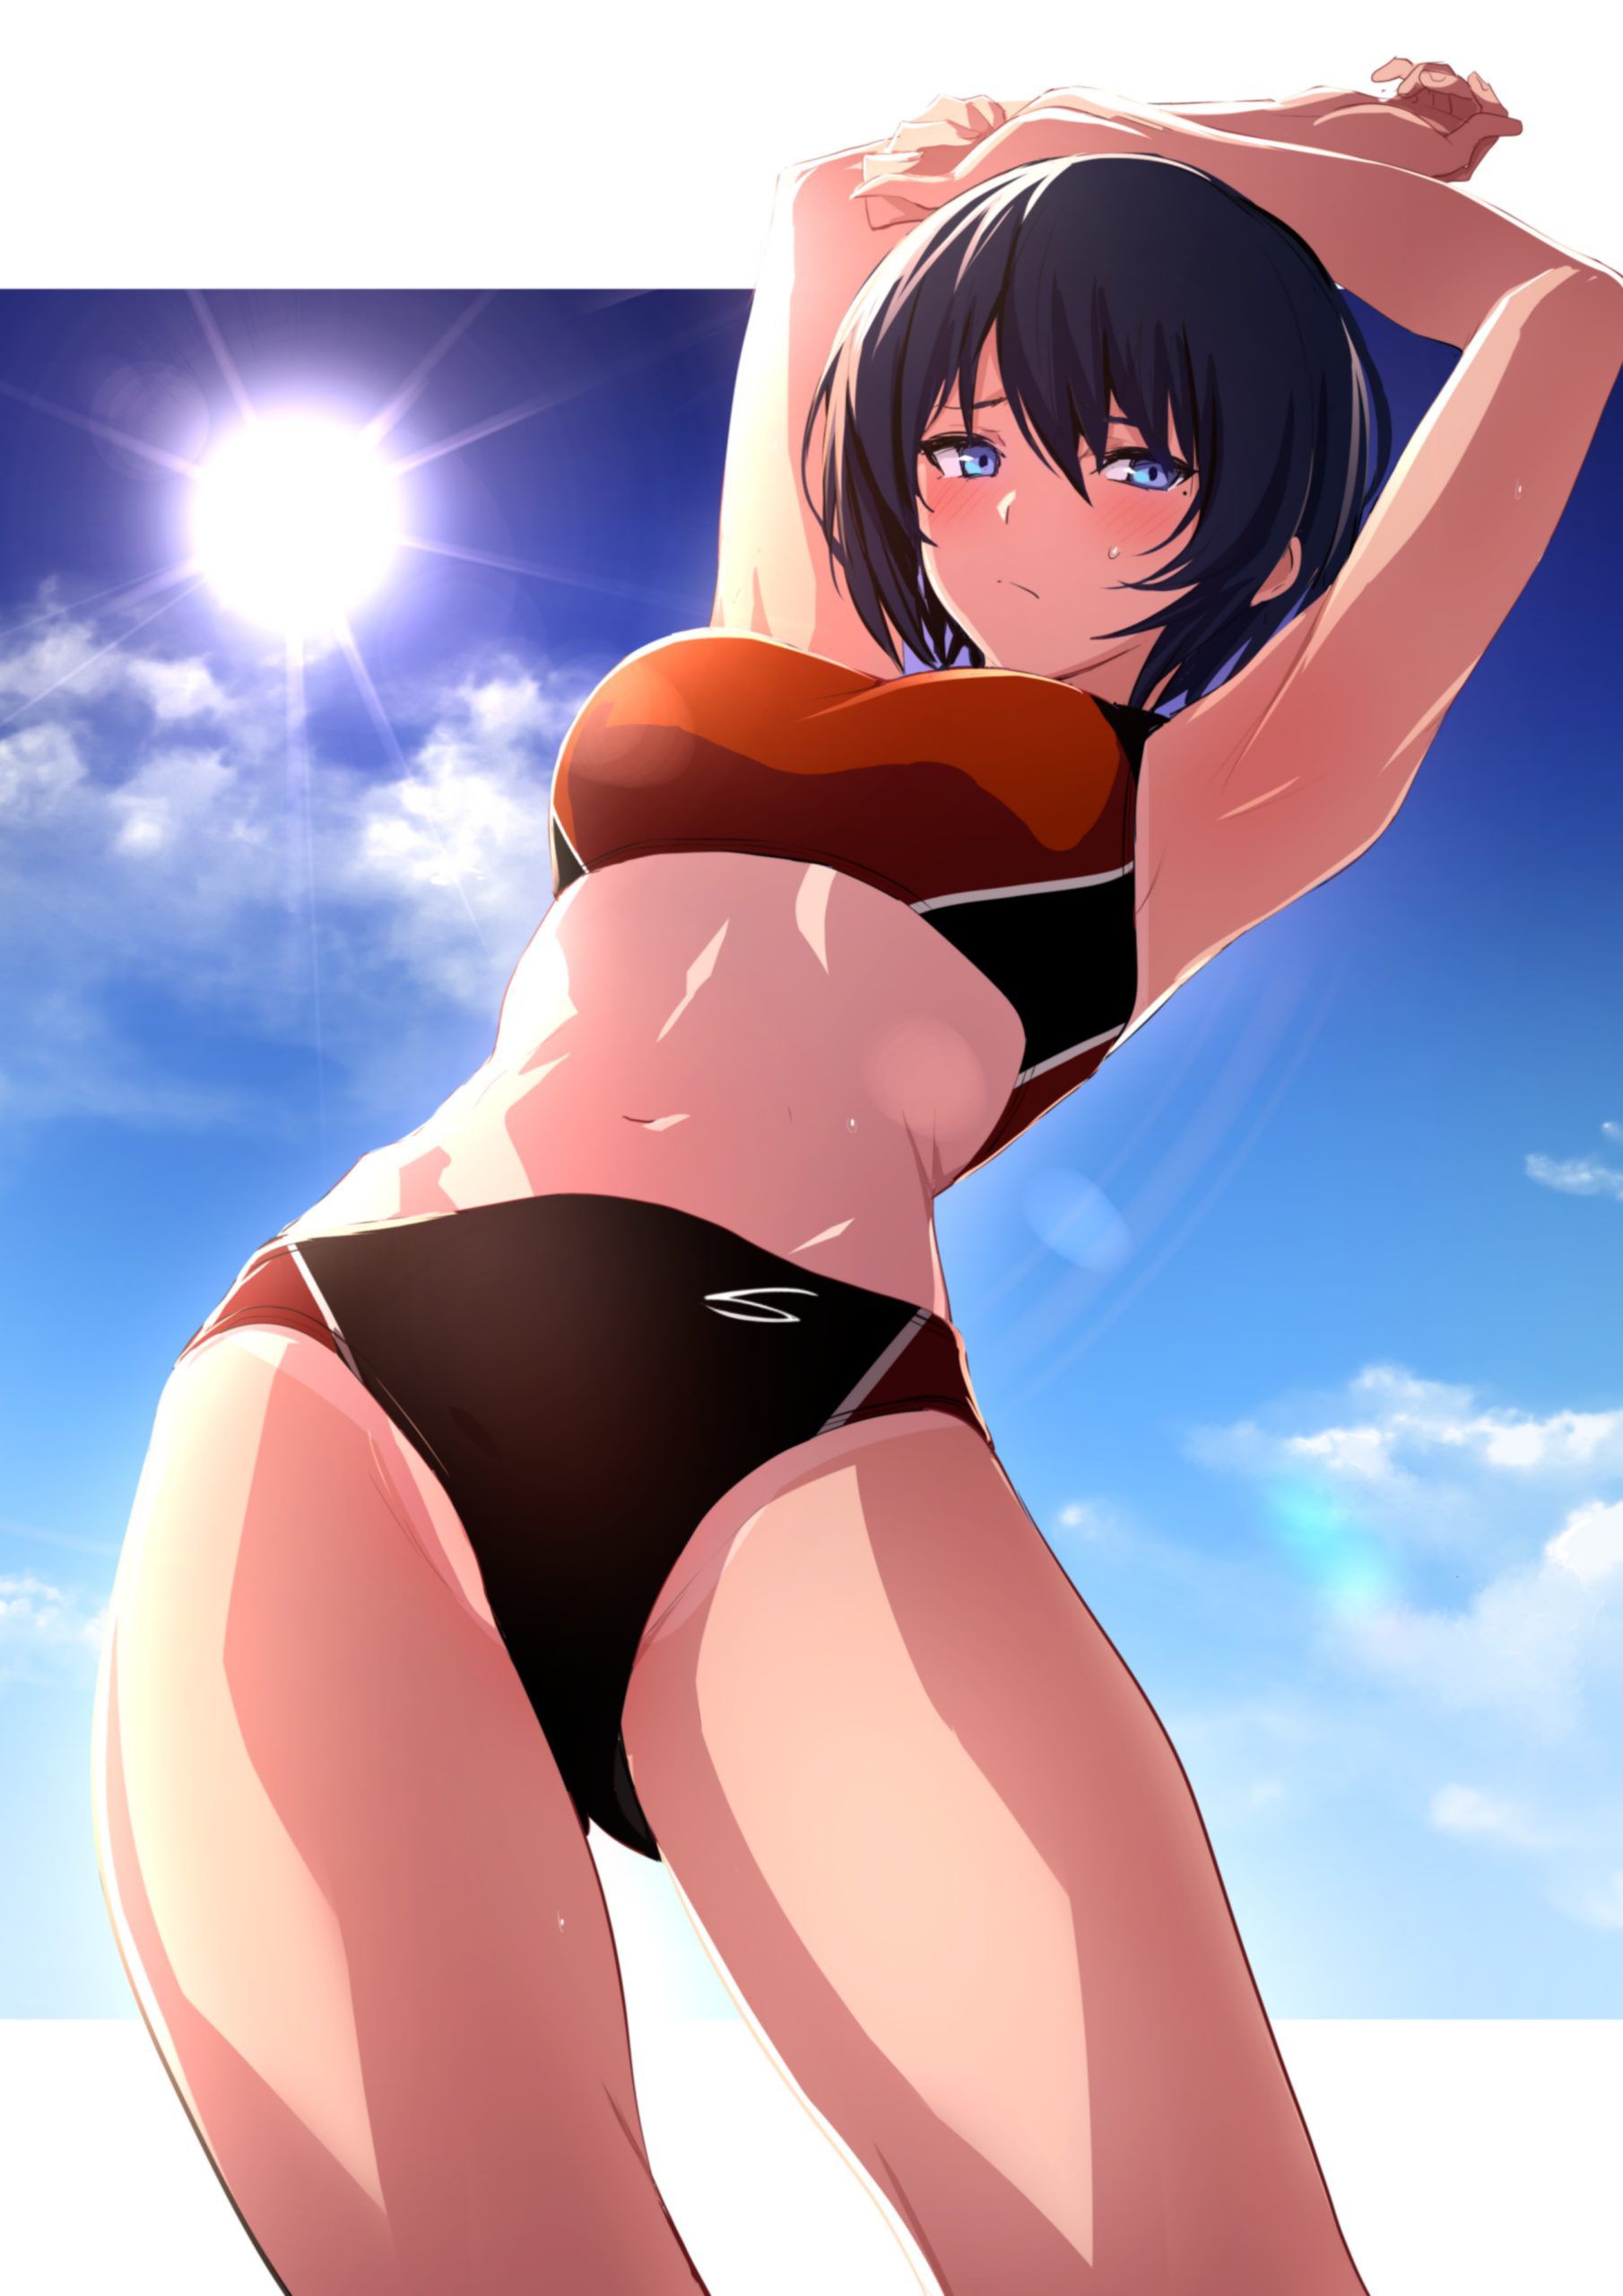 【2nd】Erotic image of a girl with a sunburn after Part 10 6